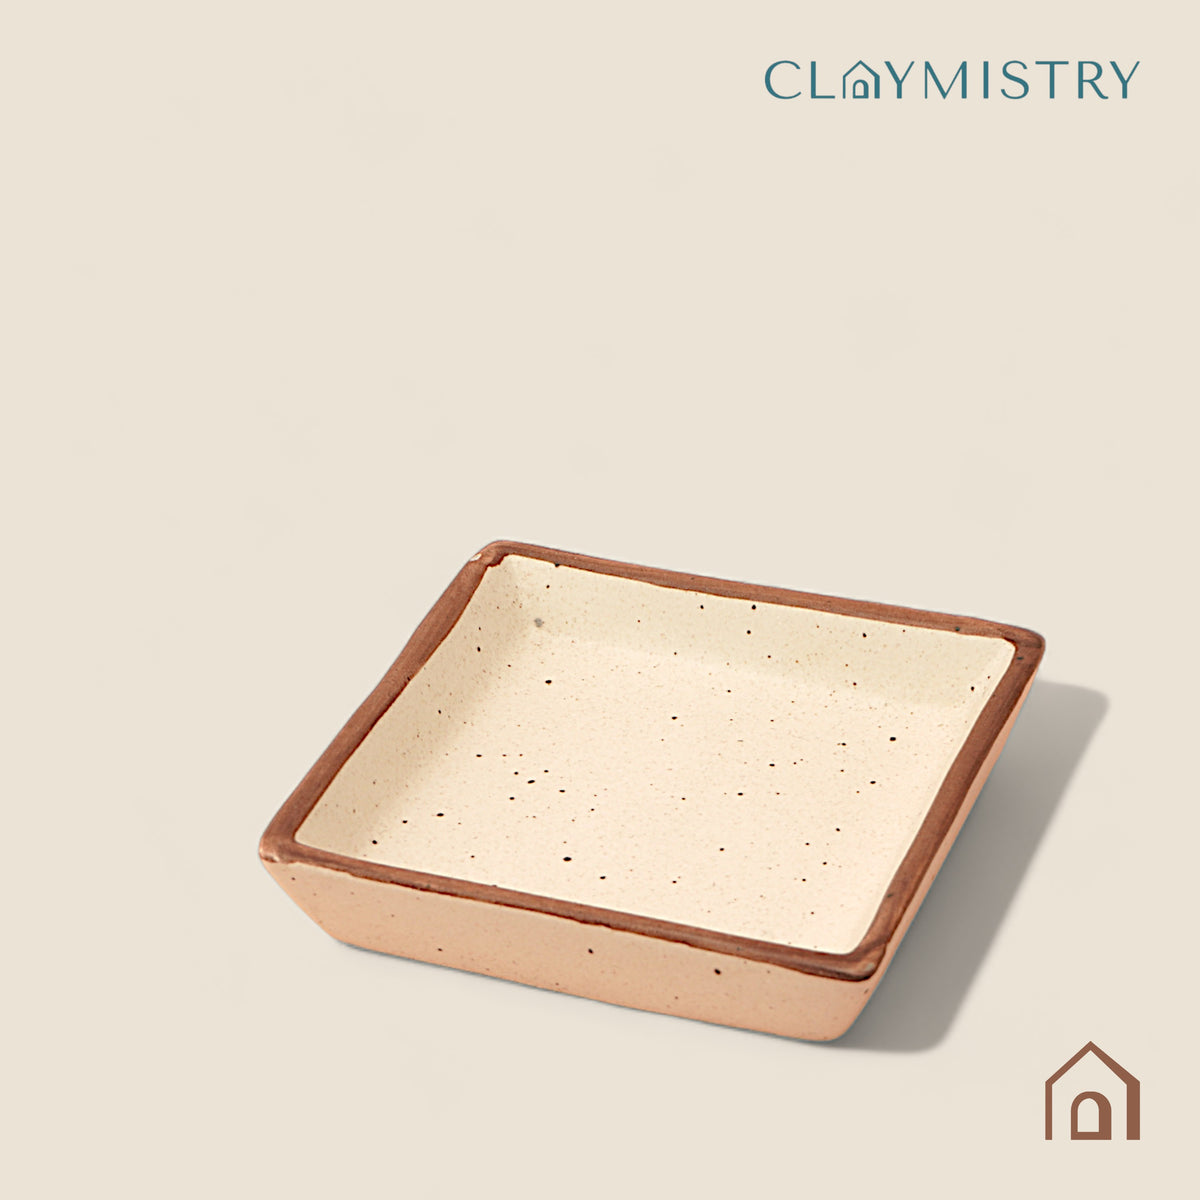 Claymistry Small Ceramic Snacks Ivory with Brown Edges Square Shaped Serving Tray | 13cm * 13cm * 3cm | Matte | Dishwasher & Microwave Safe | Biscuit, Namkeen, Chips, Tray | Premium Kitchen Crockery